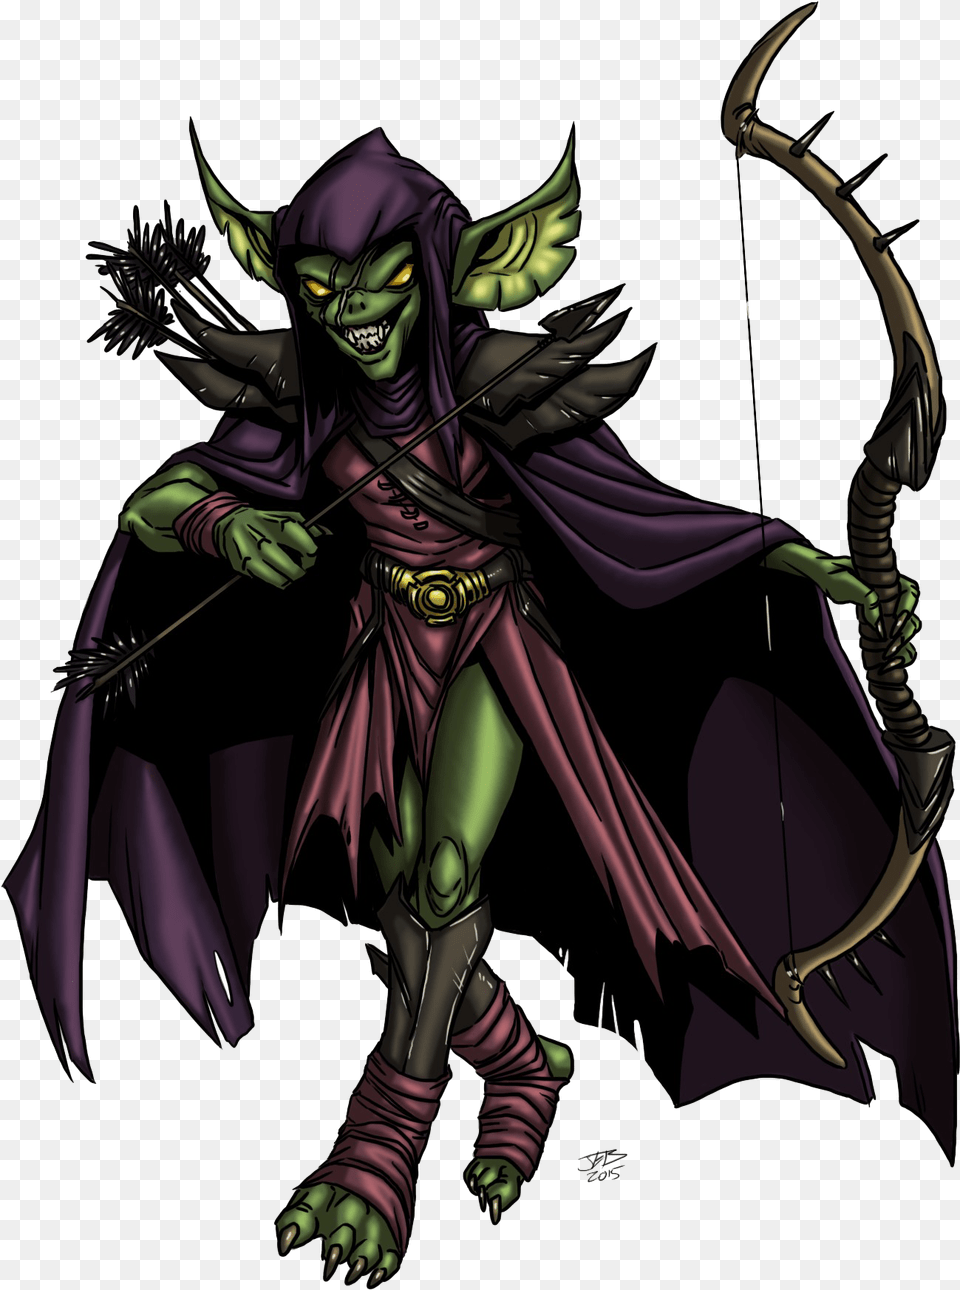 Goblin Pic Dungeons And Dragons Goblin Rogue, Archer, Archery, Bow, Weapon Free Transparent Png